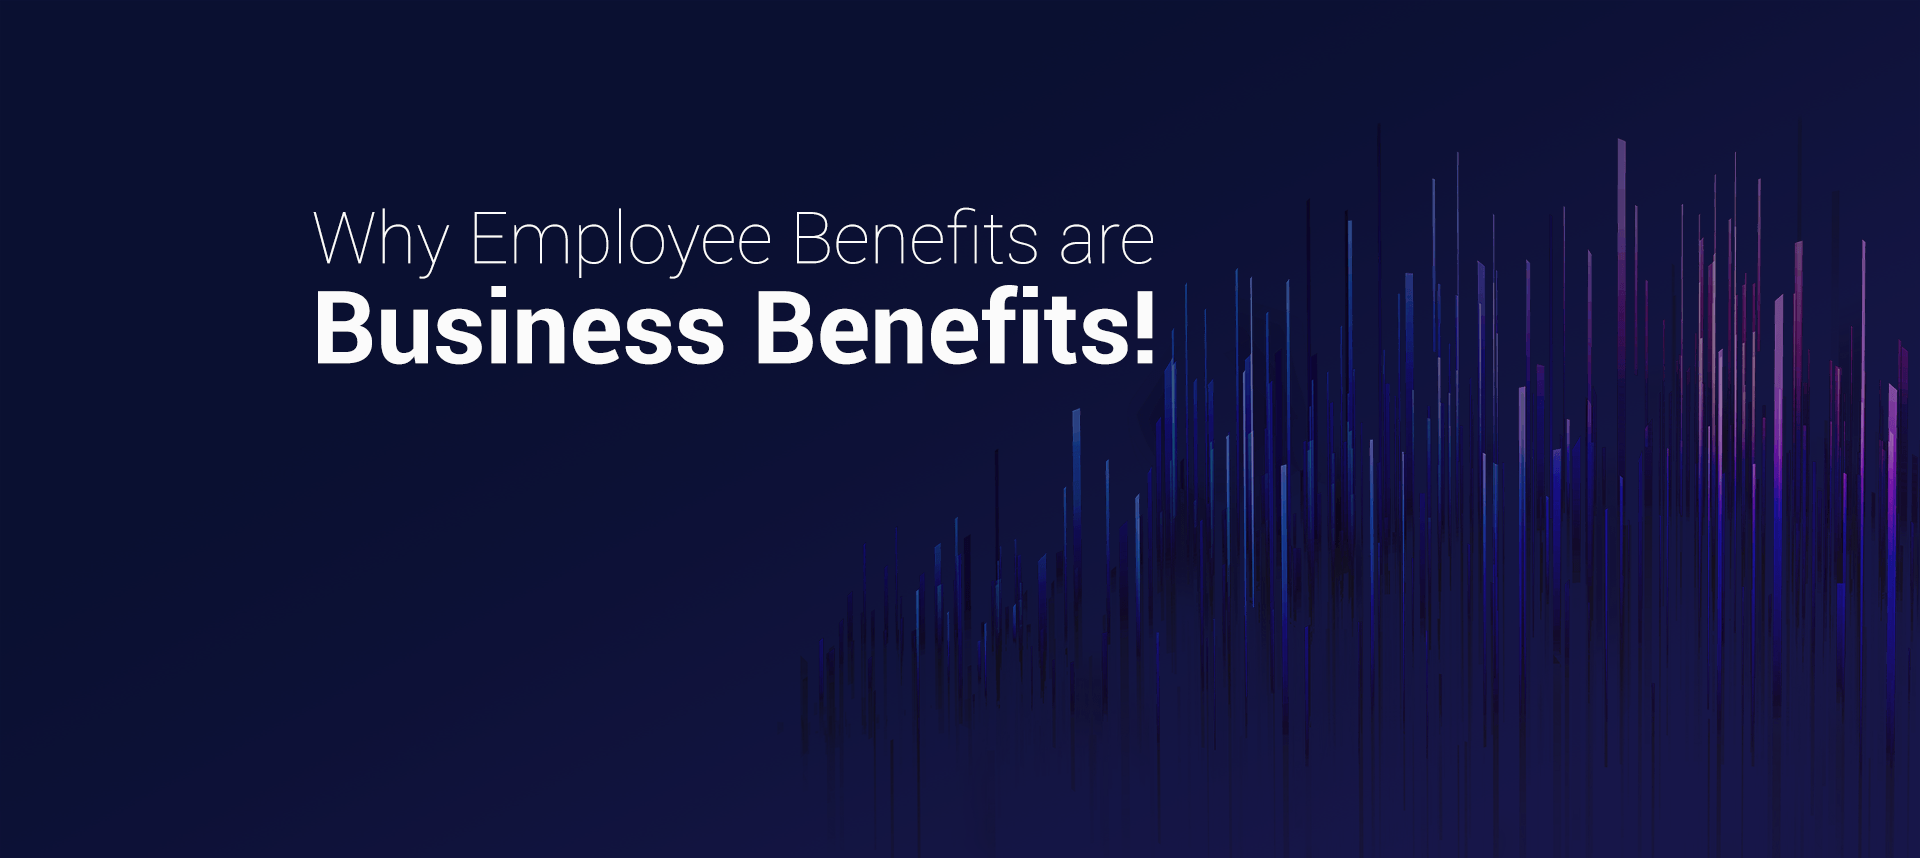 Why Employee Benefits are Business Benefits